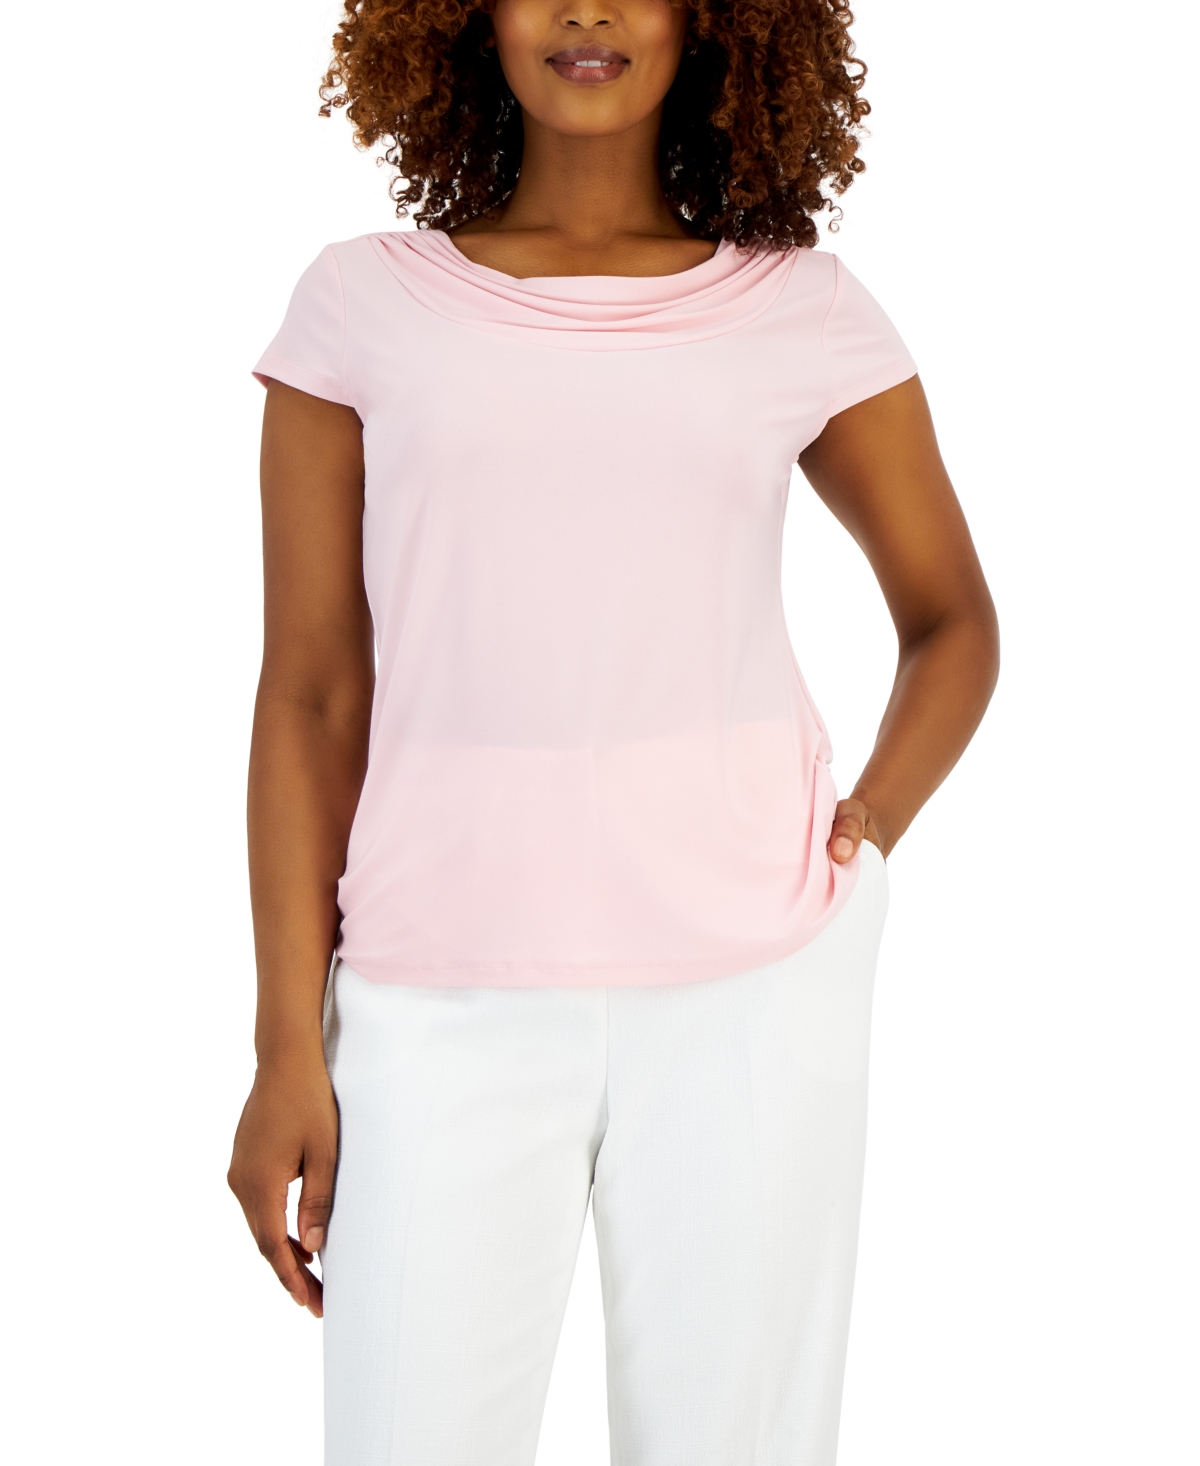 Petite Cowl-Neck Top - Pink Perfection